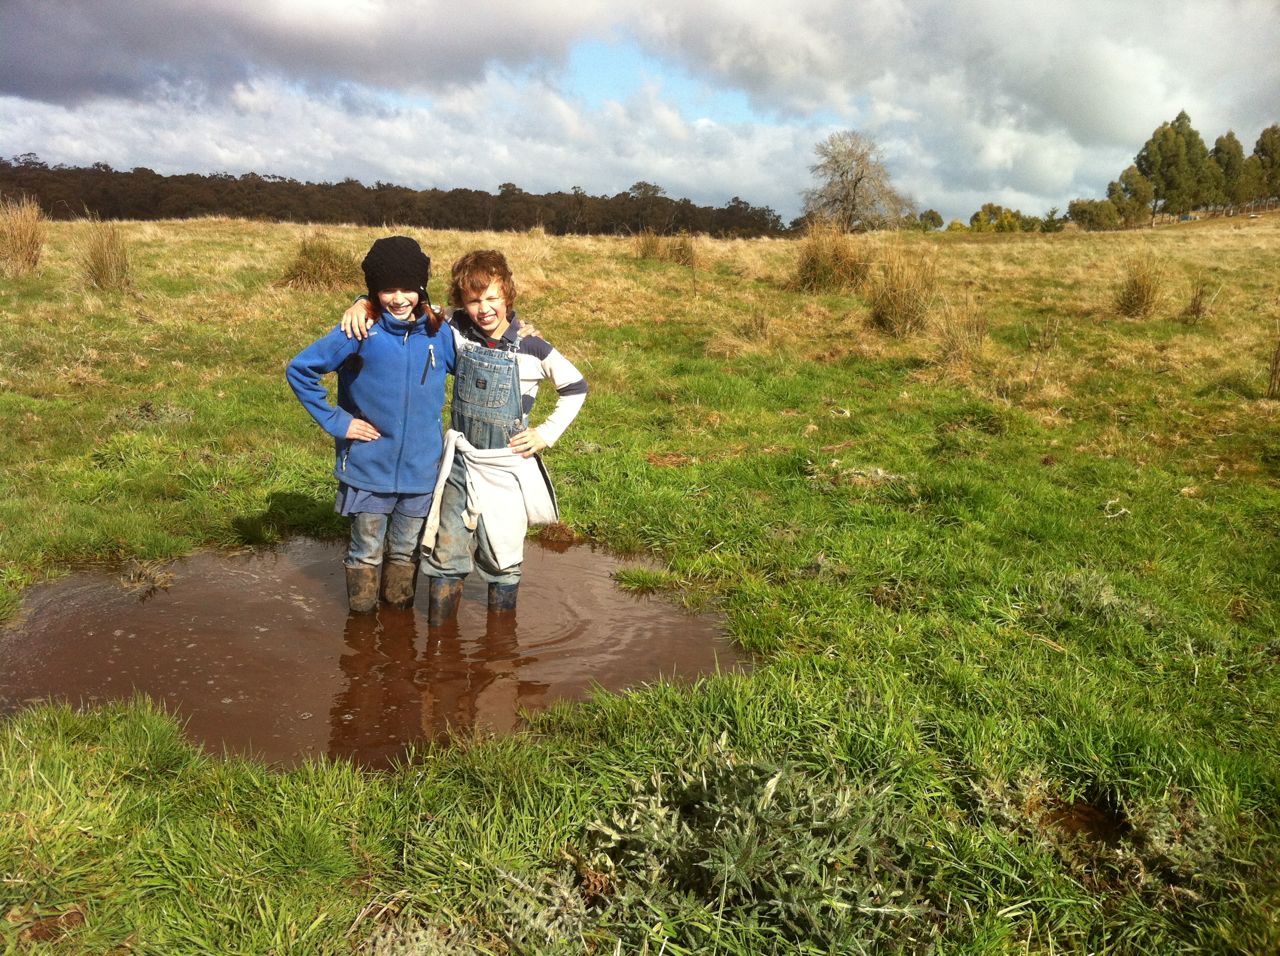 The orsmkids embracing winter on the farm.